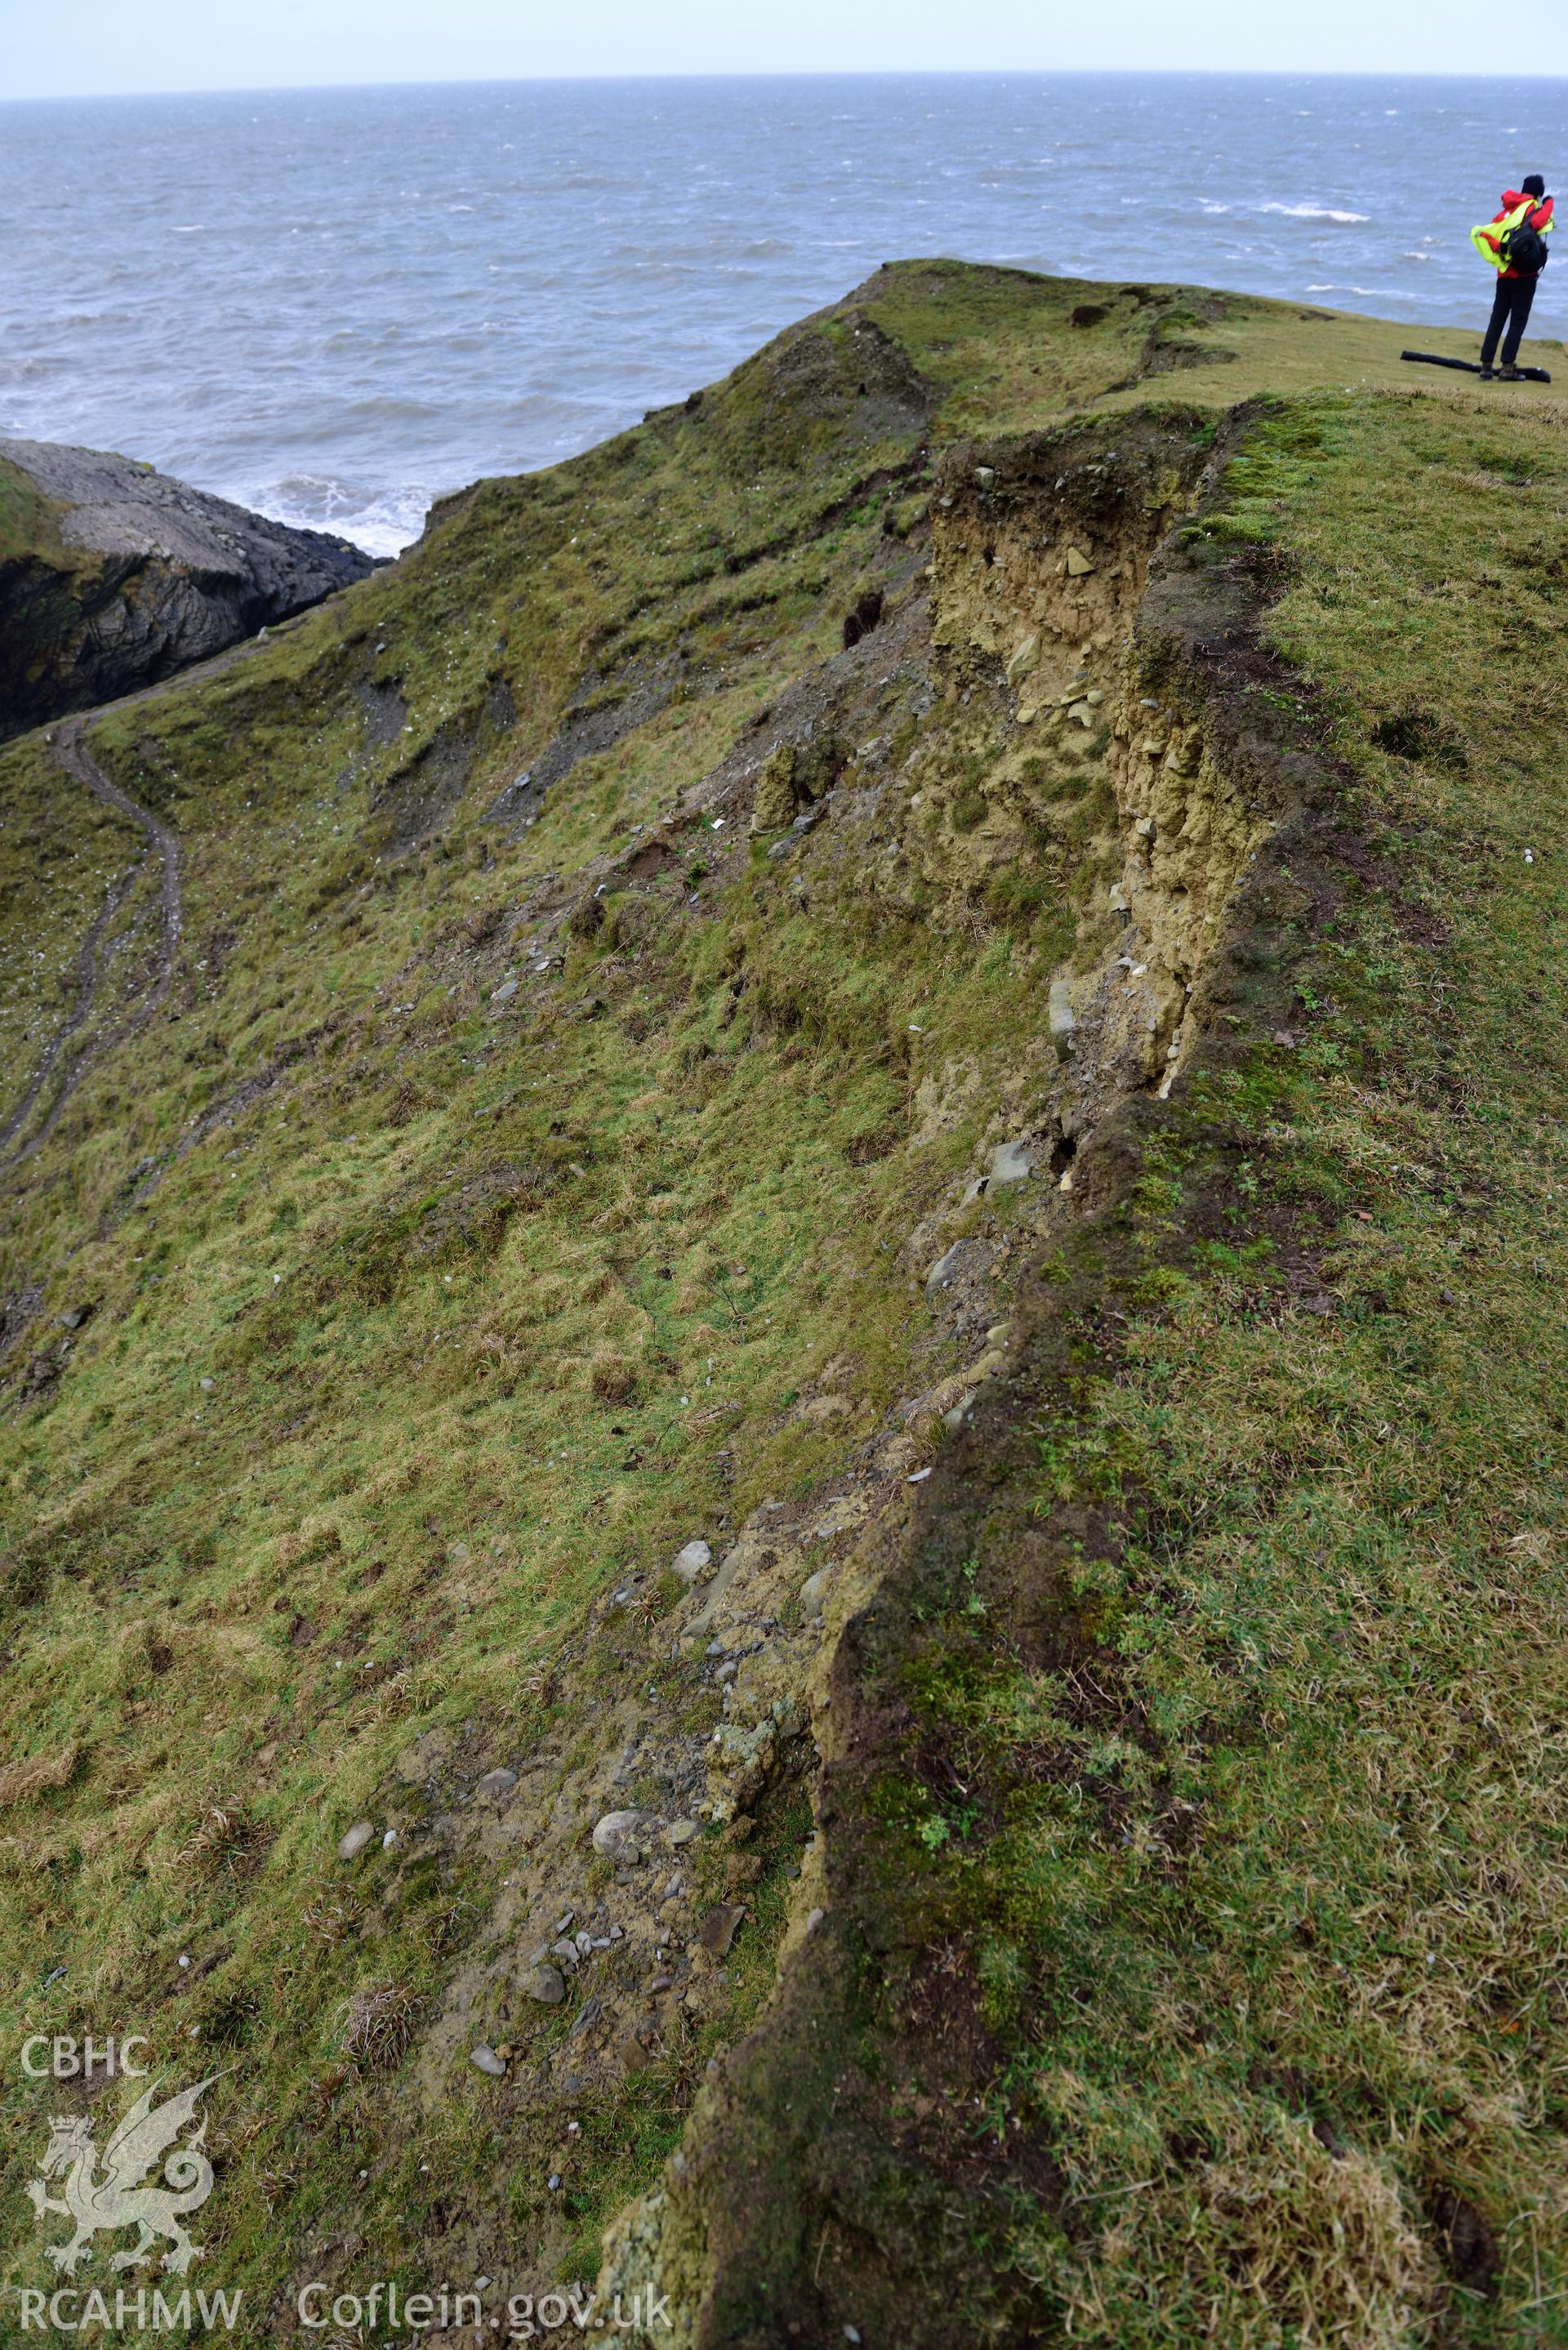 Top of eroding section edge of Castell Bach (NPRN 93914). Survey staff visible. Camera facing N. Taken by Daniel Hunt for the purpose of site monitoring 13/02/2018.
Produced with EU funds through the Ireland Wales Co-operation Programme 2014-2020. All material made freely available through the Open Government Licence.